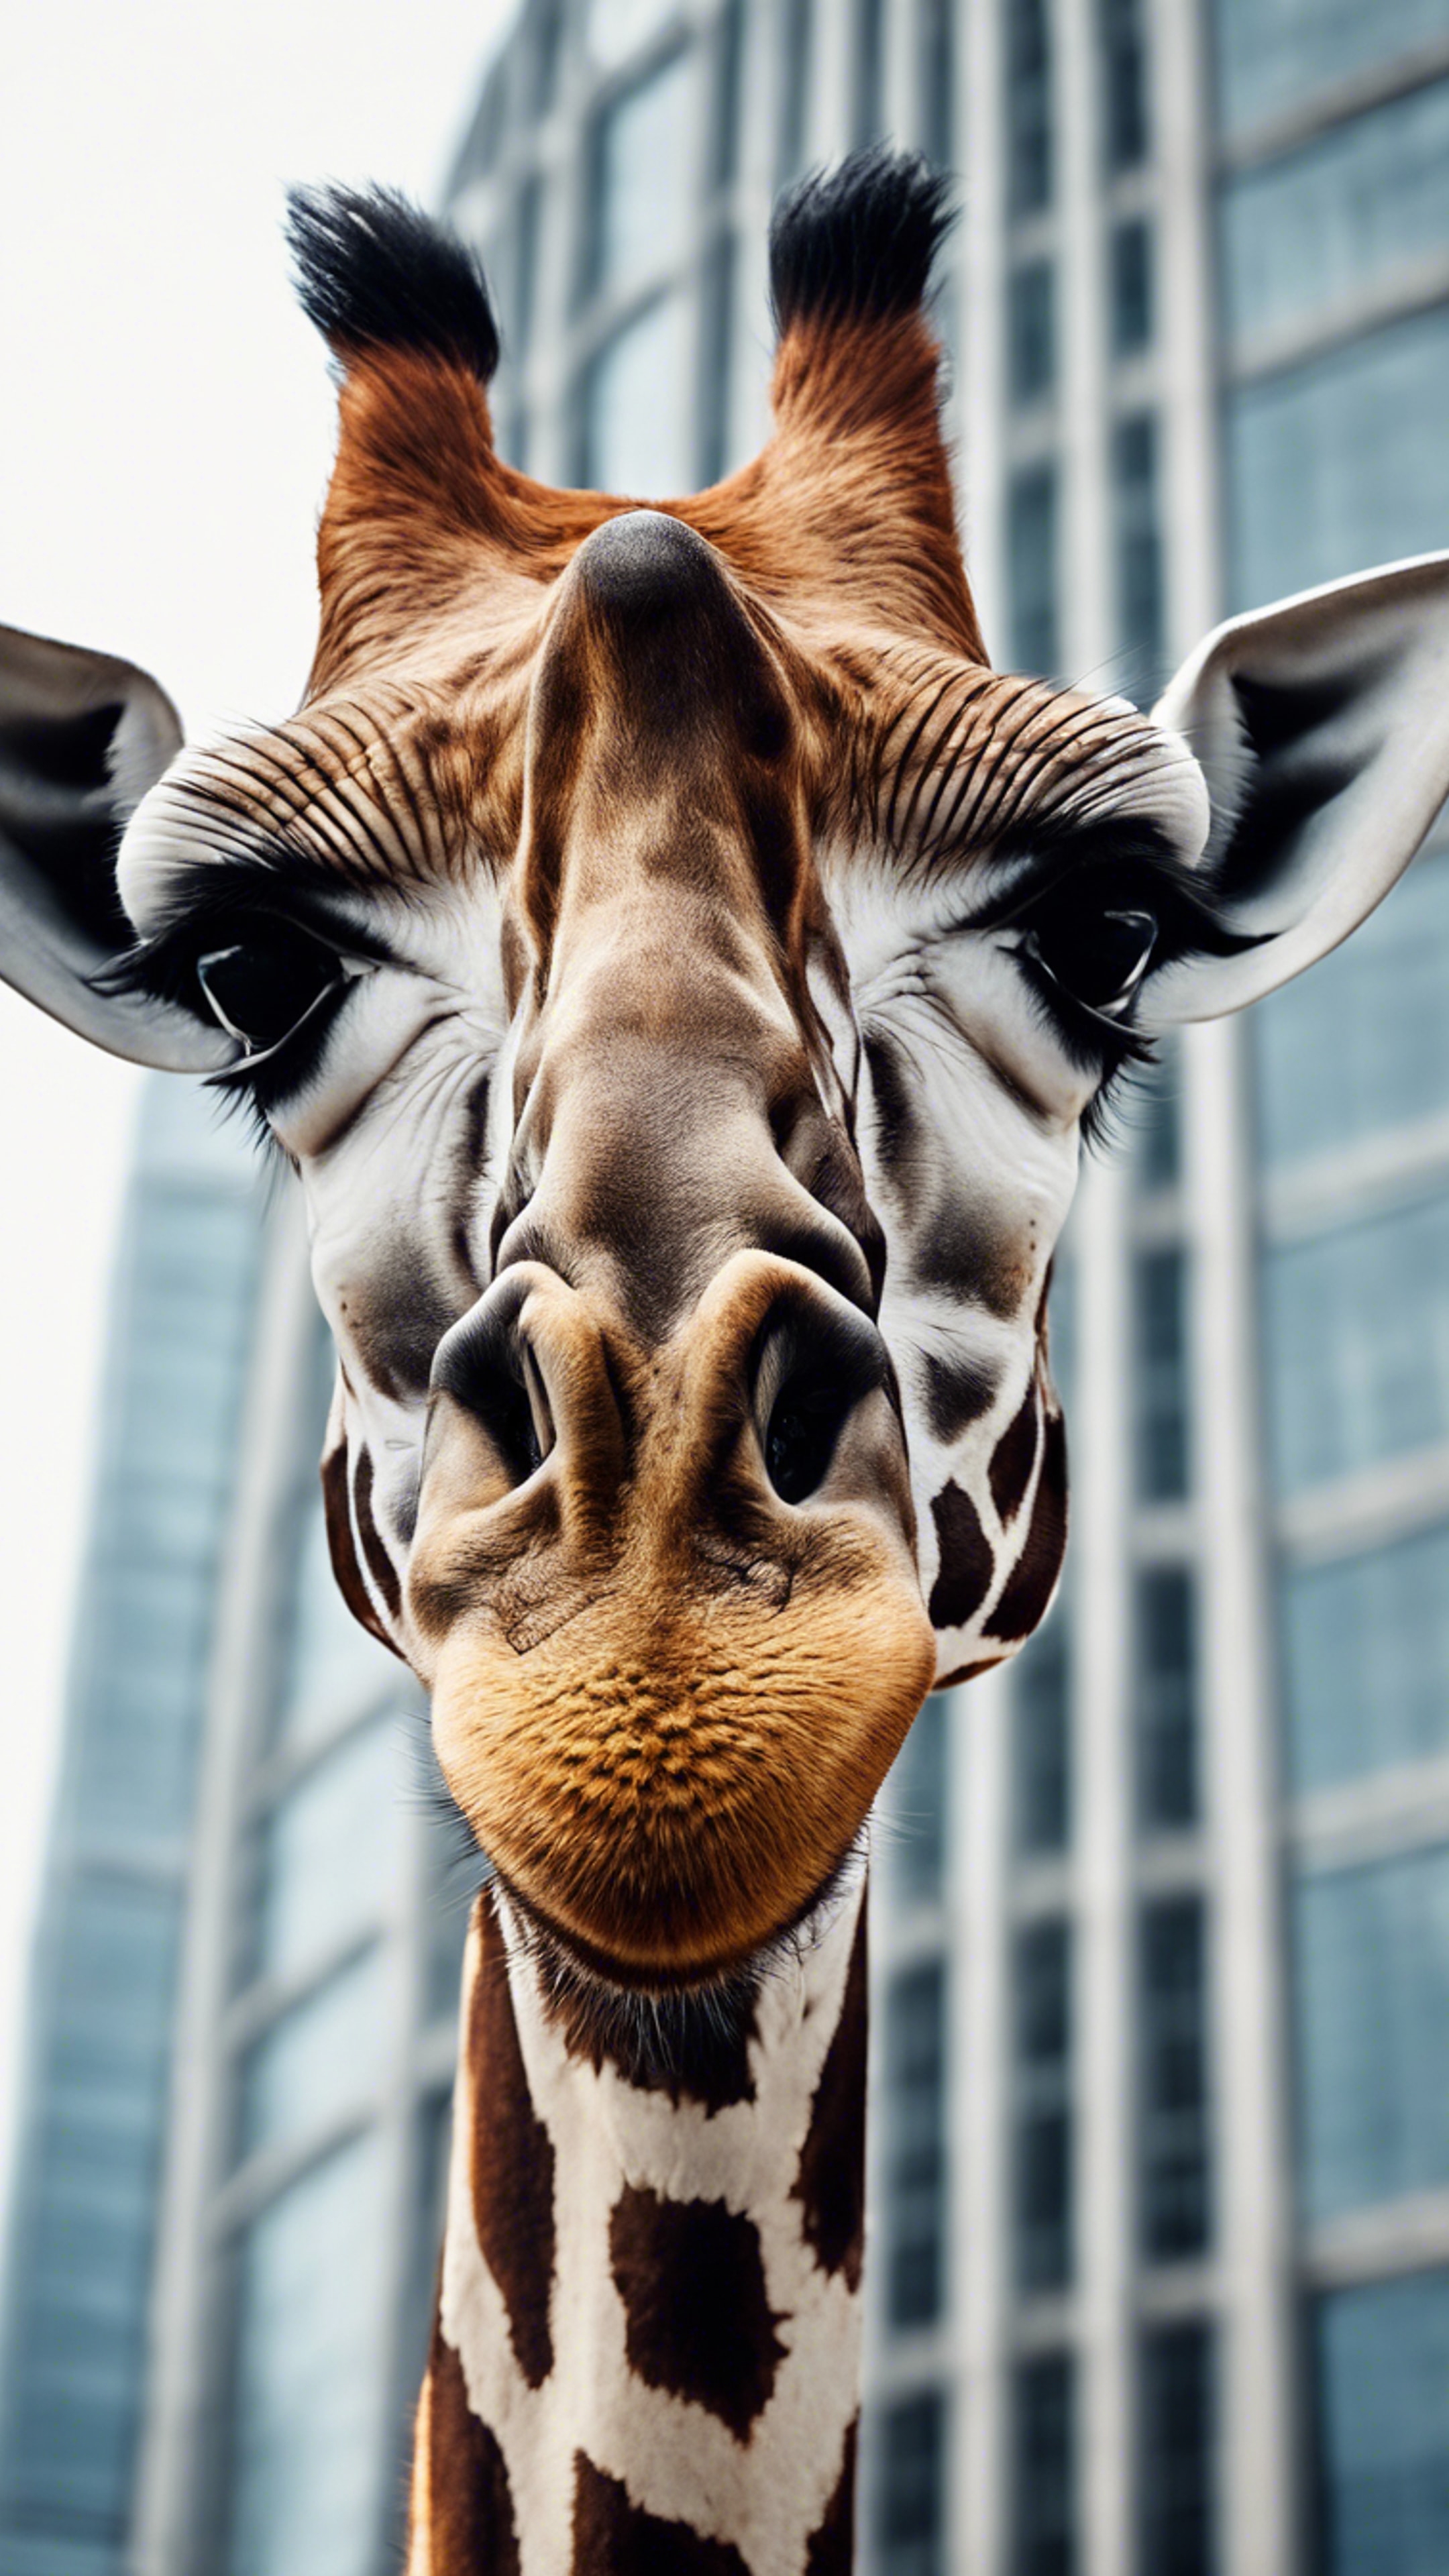 A giraffe in an urban setting, poking its head out from behind a skyscraper, symbolising wild nature confronting urbanisation. 벽지[4646bbcdc786429d9f19]